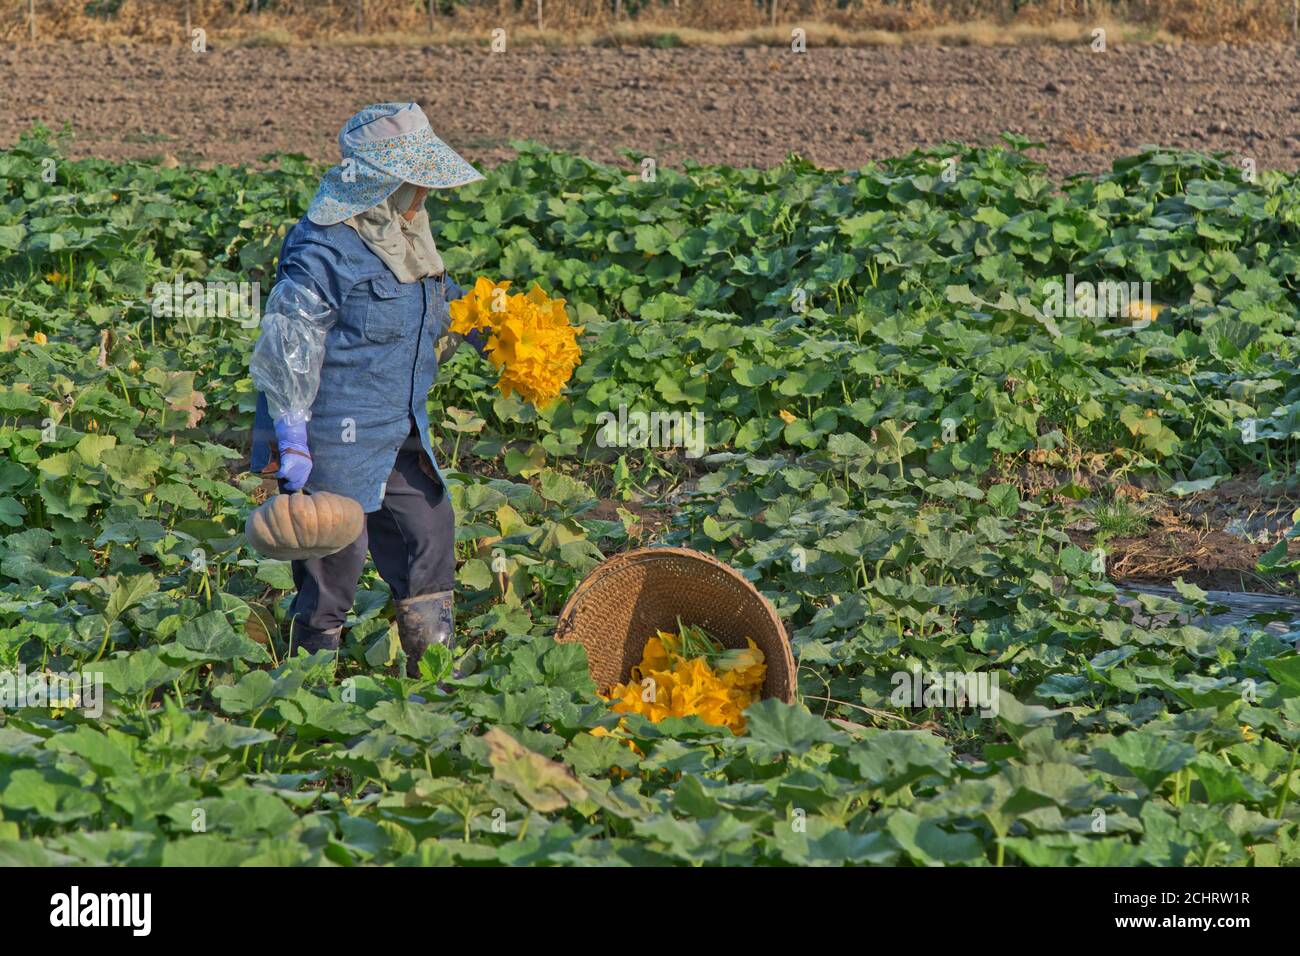 Female field worker carrying harvested  Chinese Tropical squash male flowers 'Cucurbita pepo'. Stock Photo